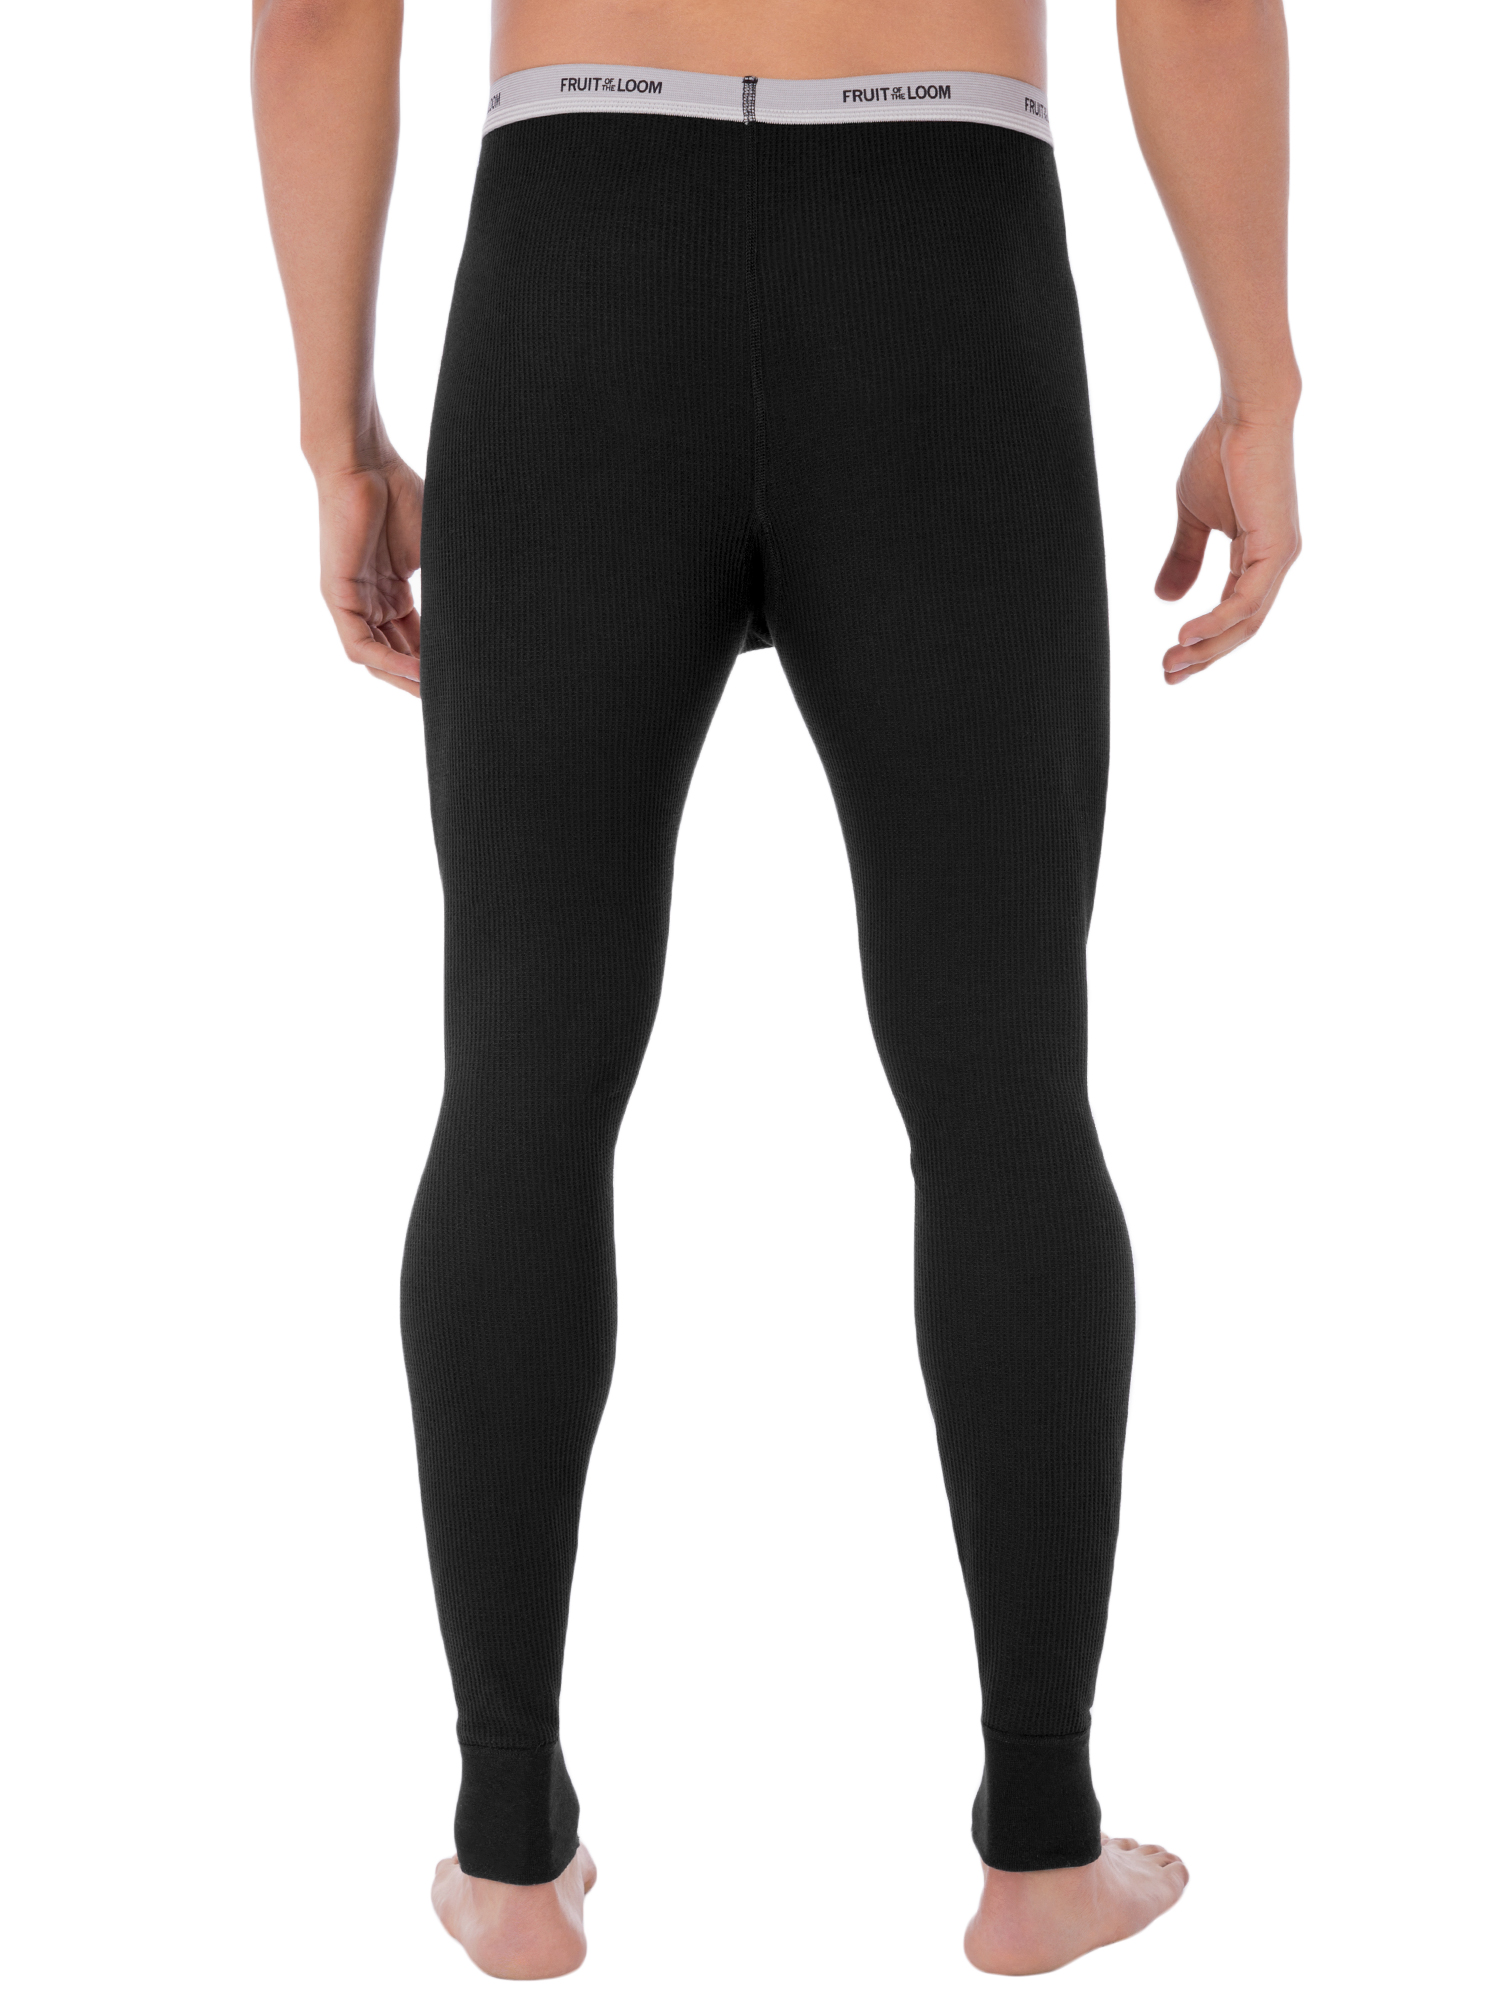 Big Men's Classic Bottom Thermal Underwear for Men, Value 2 Pack (2 Pants) - image 5 of 18